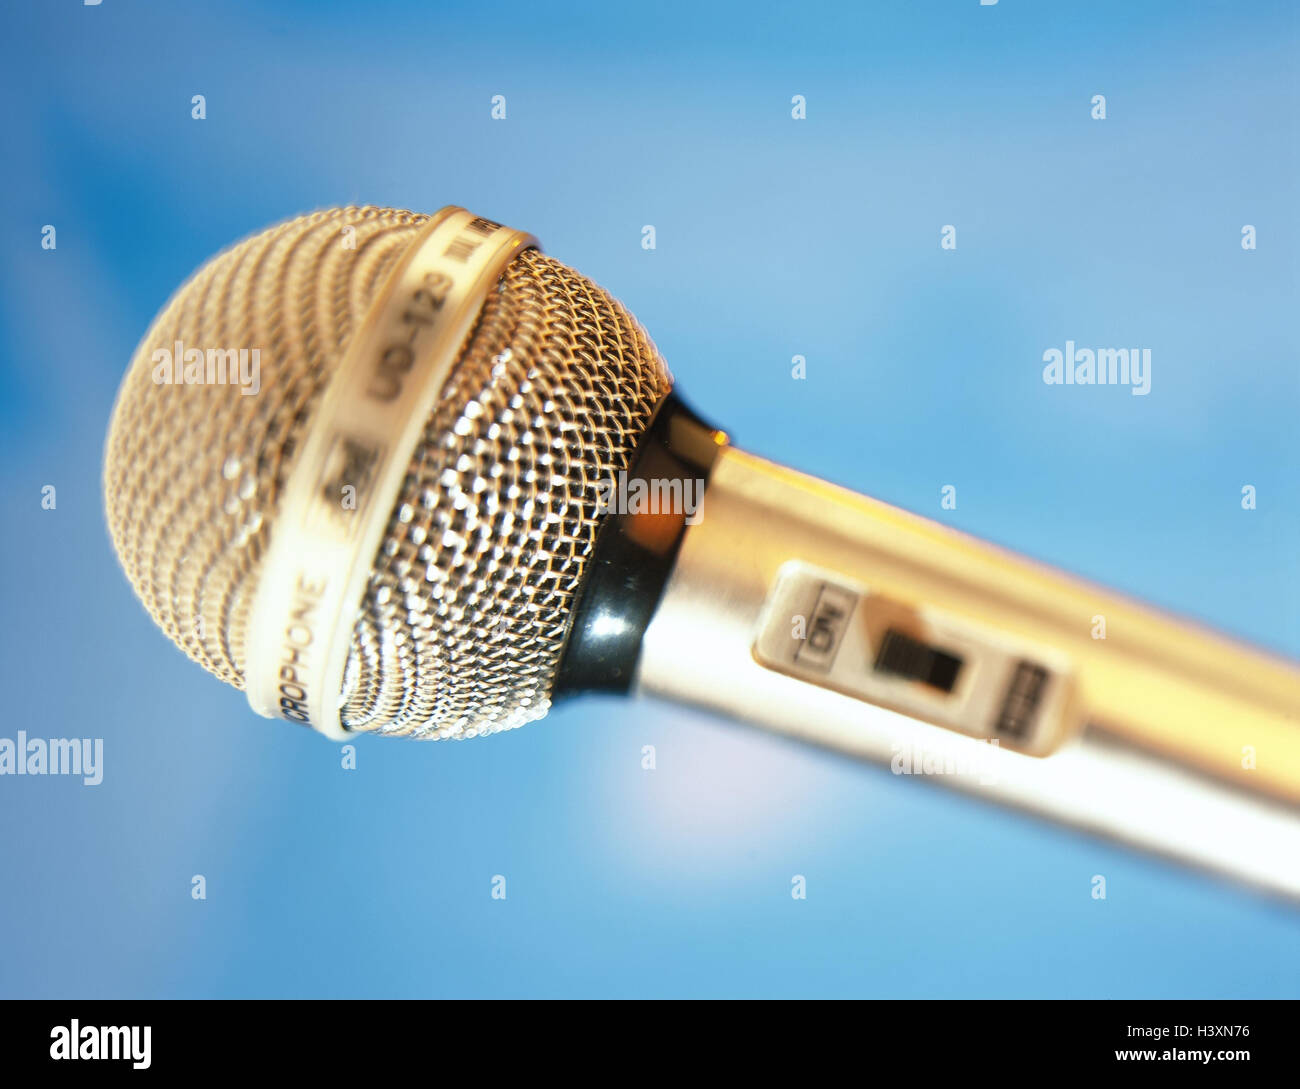 Microphone, detail, audiodevice, strengthen, volume, microphone, acoustics, perception, amplifier, tone, product photography, Still life, Stock Photo